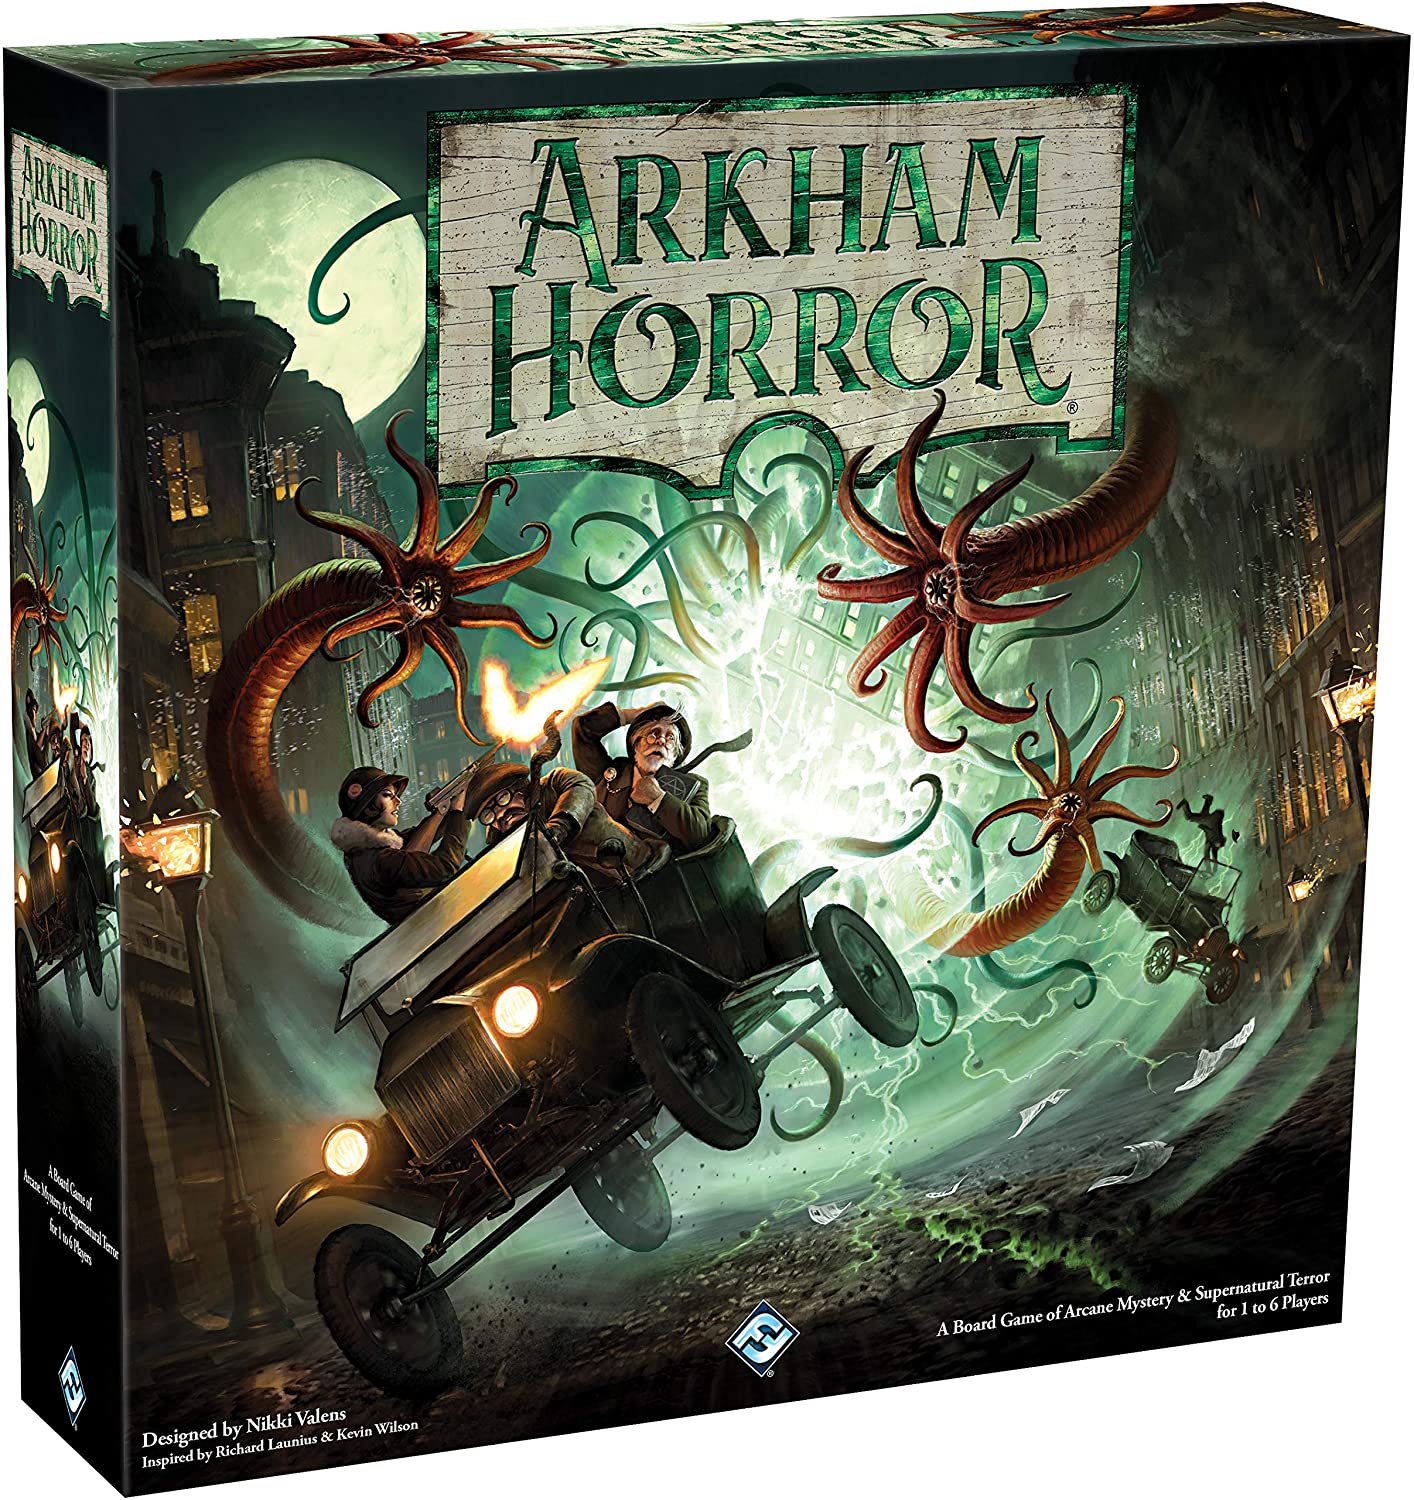 "Arkham Horror: The Card Game" review